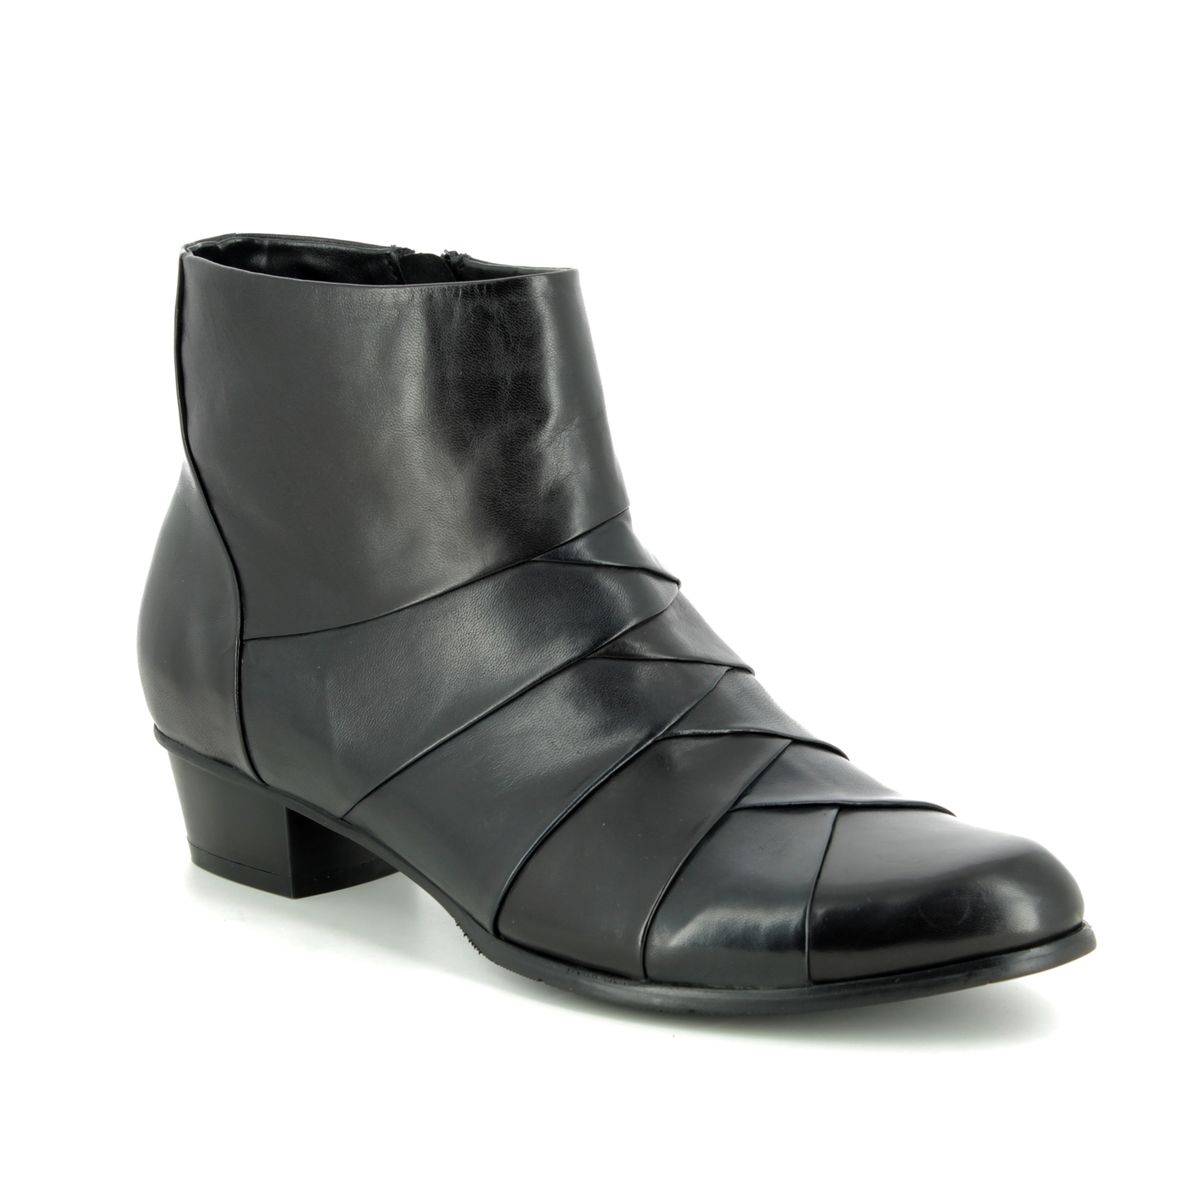 Regarde Le Ciel Stefany 172 Black Navy Womens Boots 9118-30 Ankle Boots In Soft Black Navy Leather In Size 40